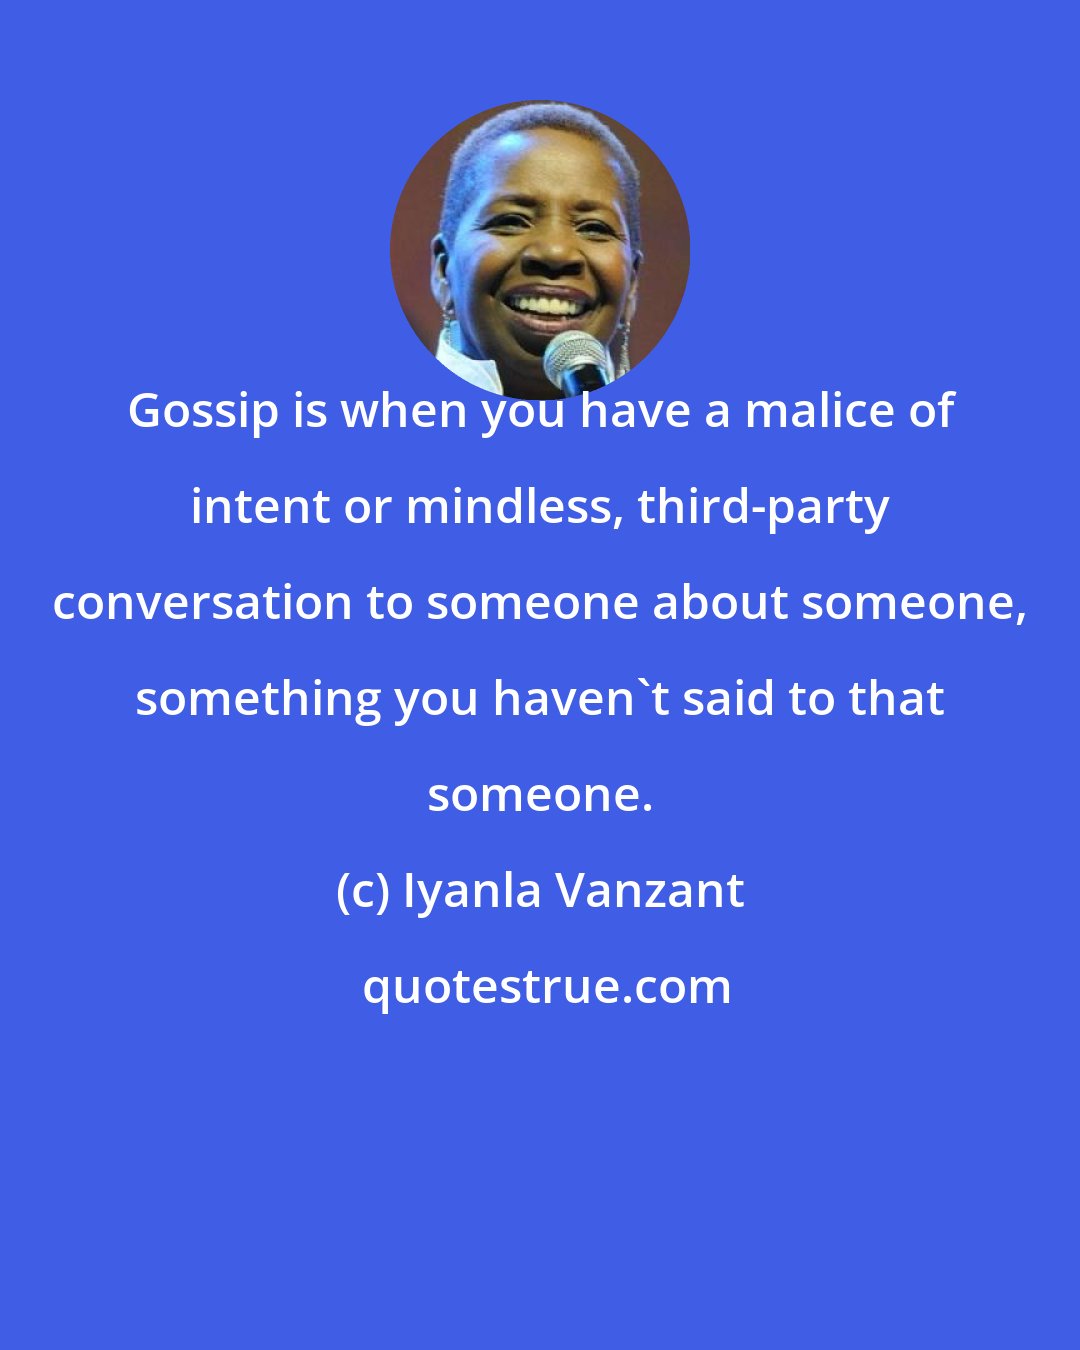 Iyanla Vanzant: Gossip is when you have a malice of intent or mindless, third-party conversation to someone about someone, something you haven't said to that someone.